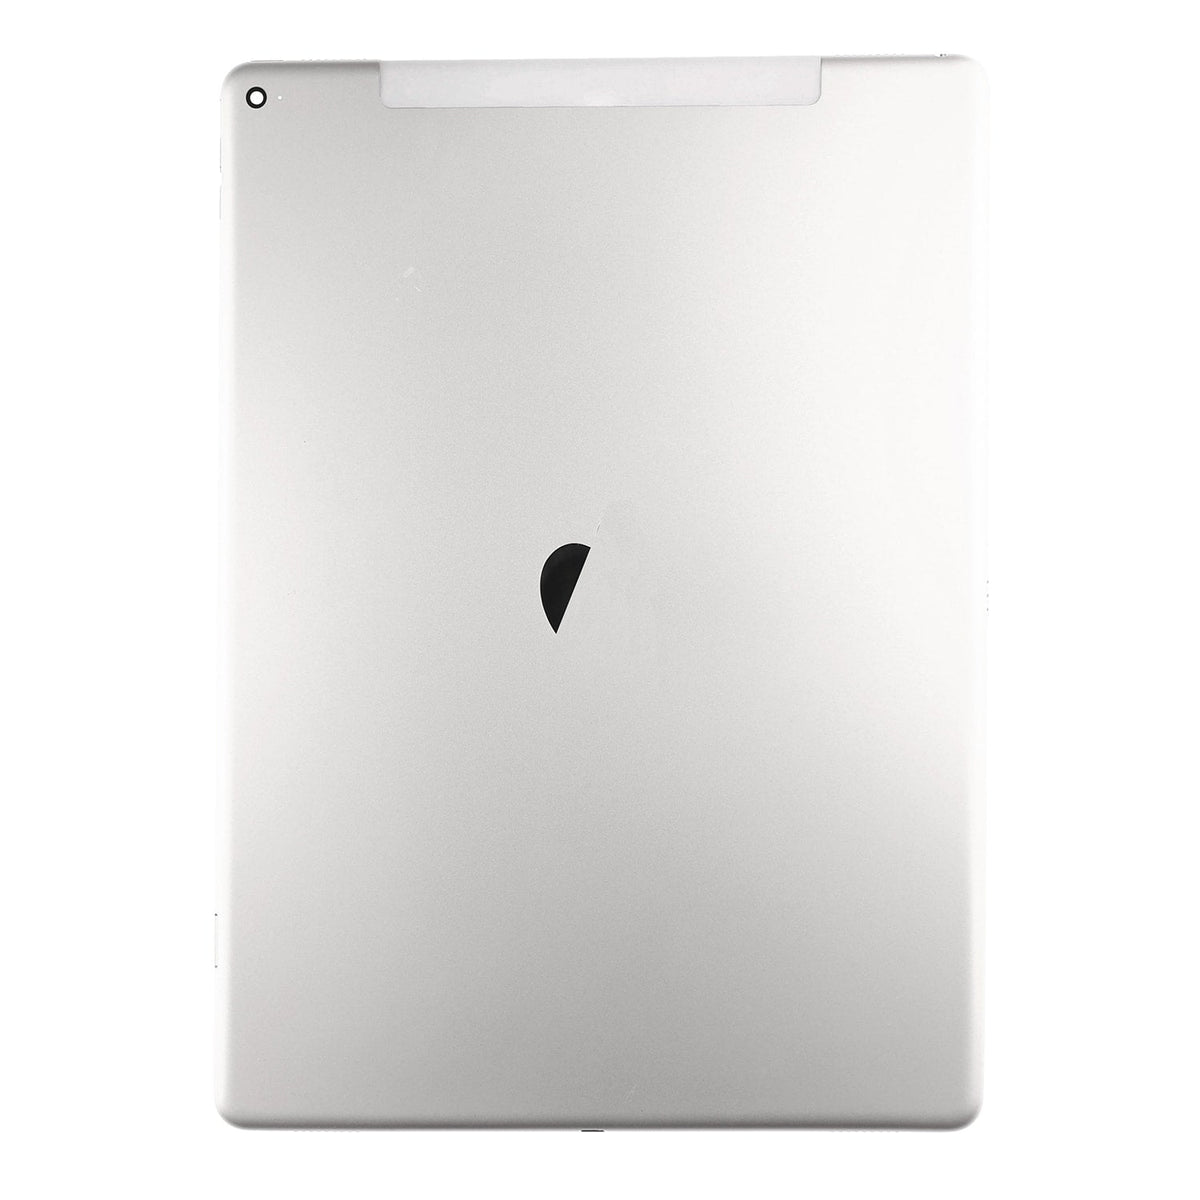 BACK COVER WIFI + CELLULAR VERSION FOR IPAD PRO 12.9" 1ST GEN SILVER